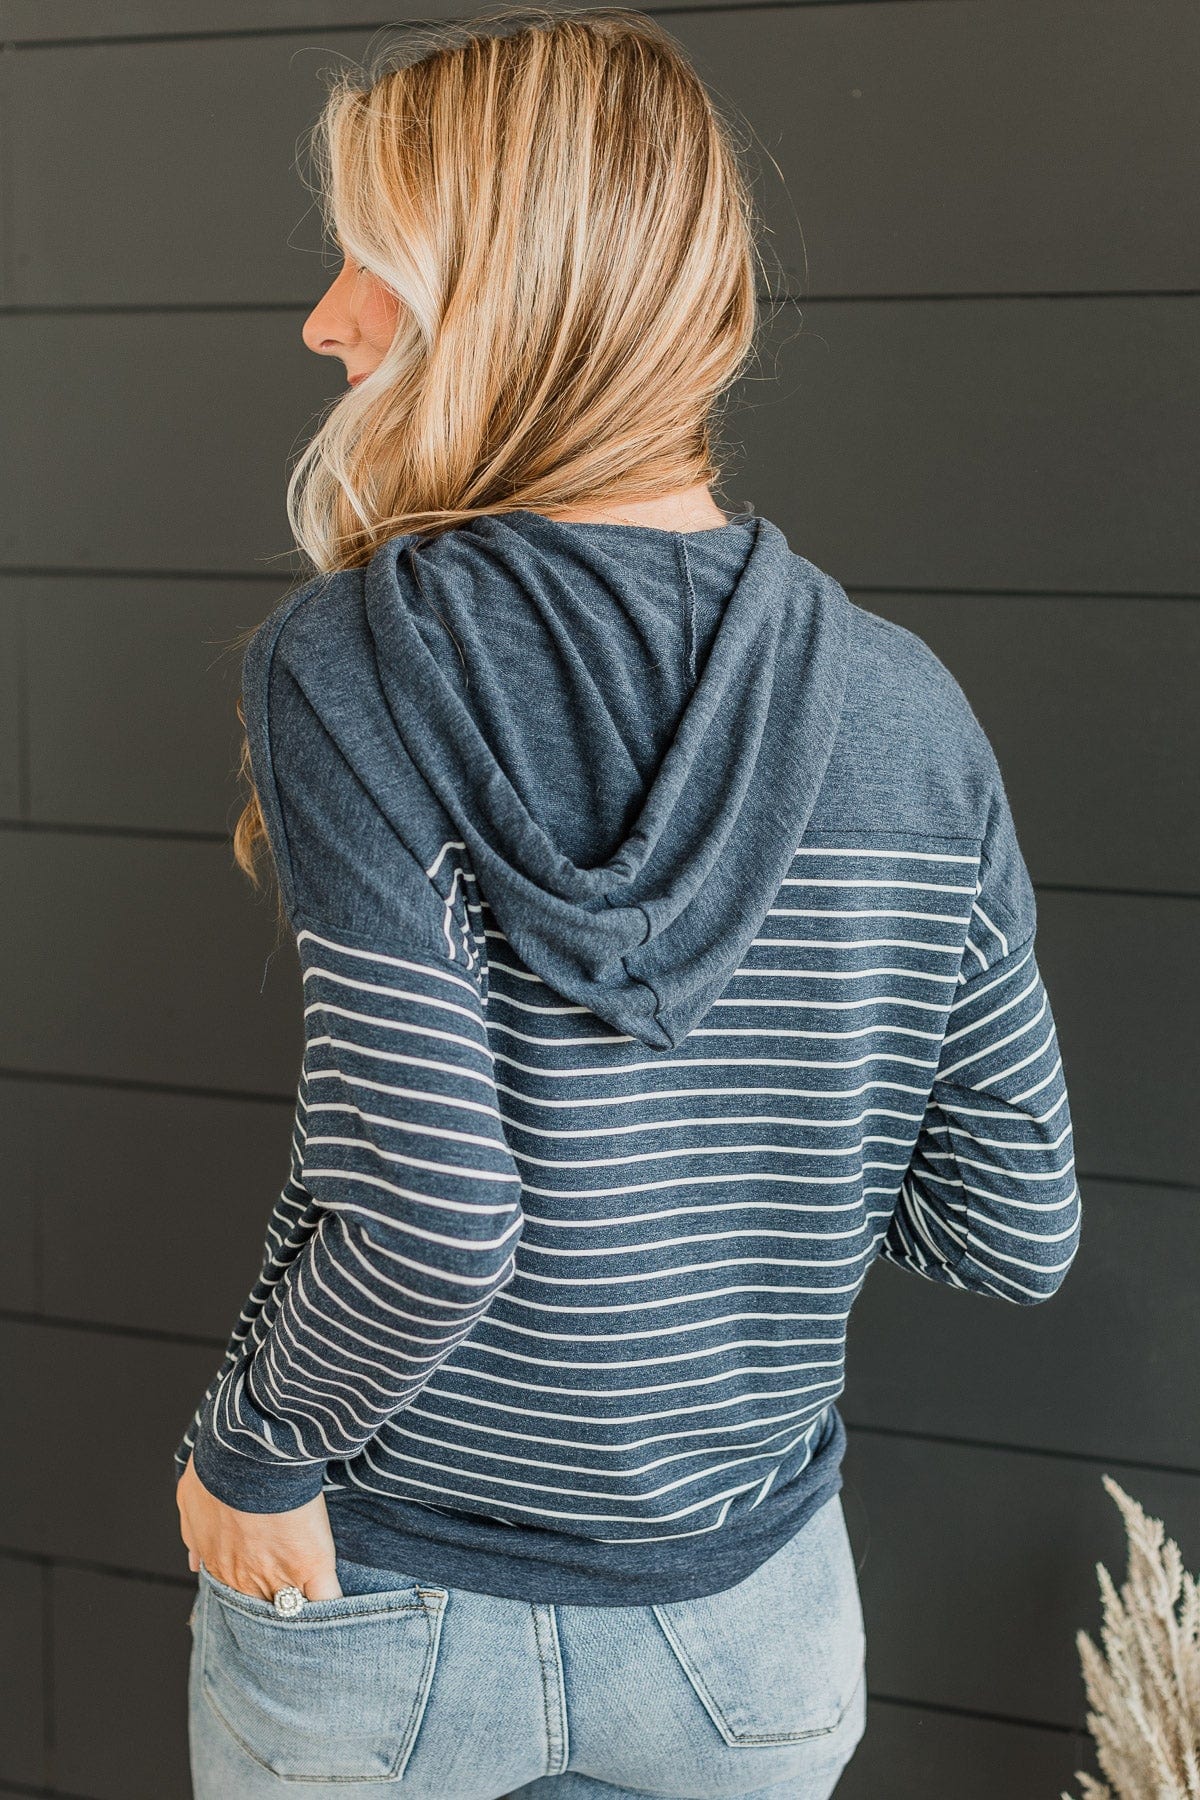 Only Yours Hooded Knit Top- Navy